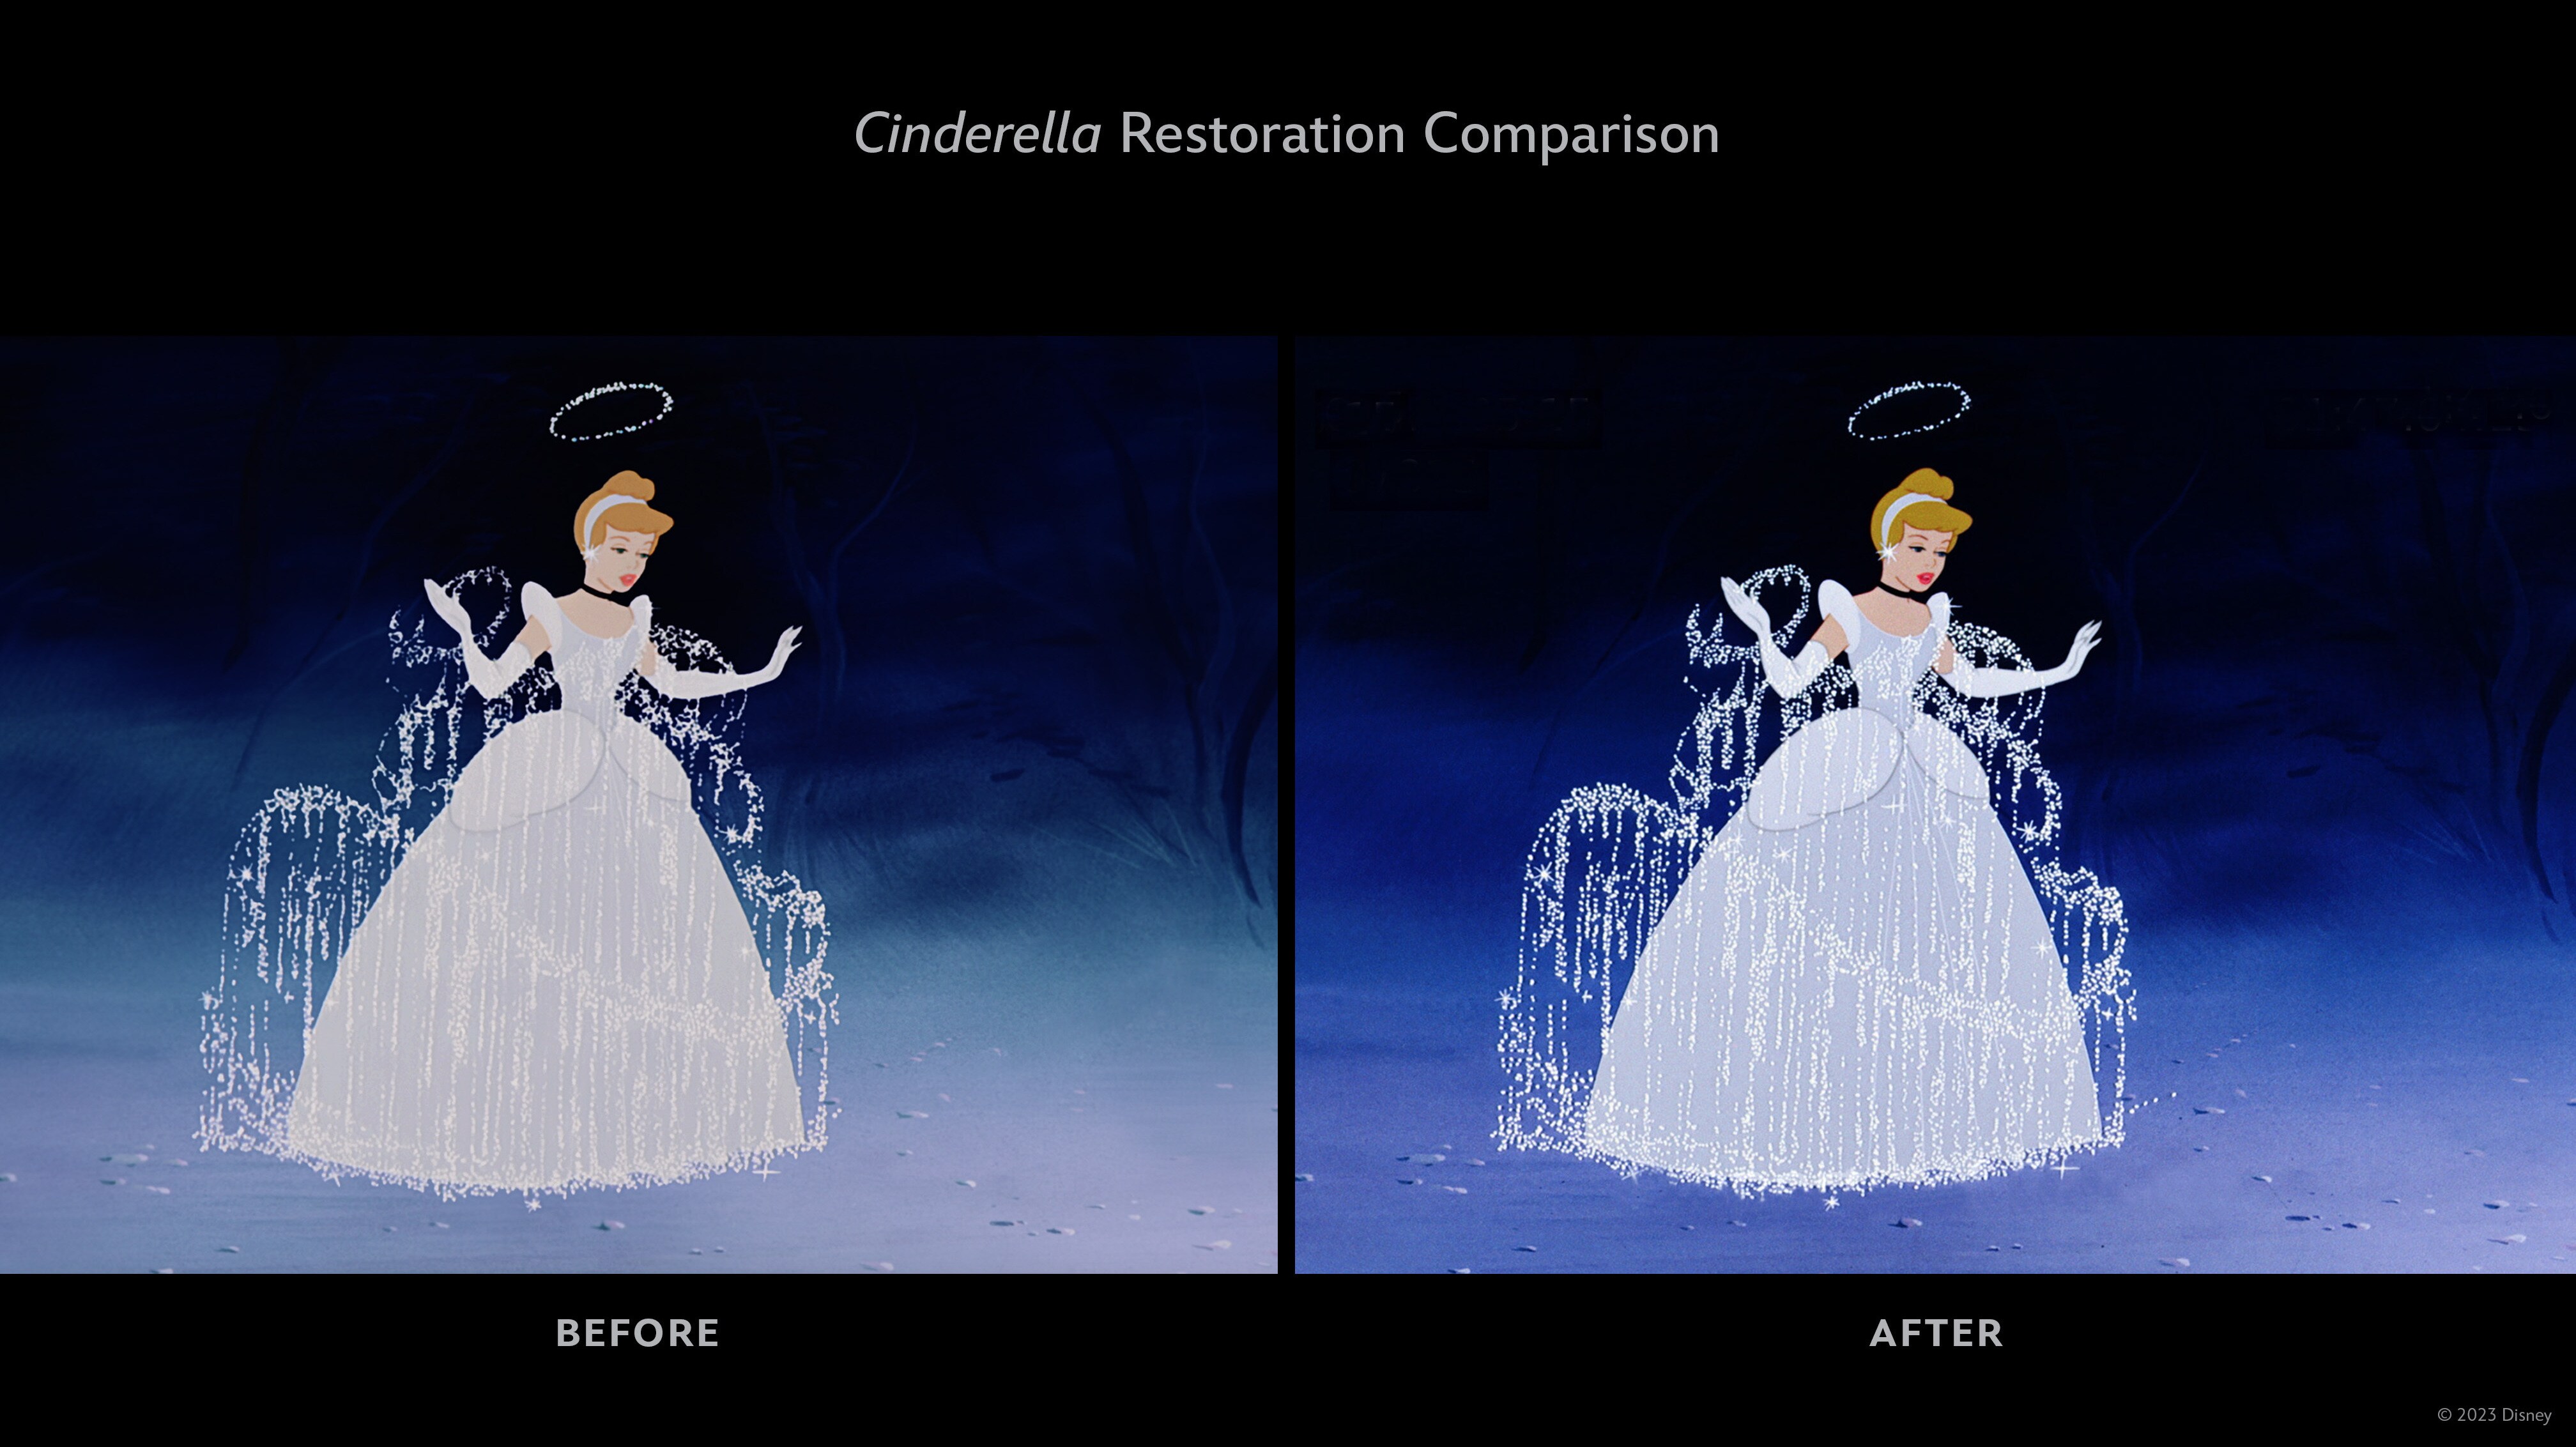 DISNEY+ TO DEBUT A STUNNING ALL-NEW 4K RESTORATION OF WALT DISNEY’S 1950 ANIMATED CLASSIC “CINDERELLA” ON AUGUST 25;  WALT DISNEY ANIMATION STUDIOS PROVIDED ARTISTIC OVERSIGHT FOR THIS ULTIMATE RESTORATION